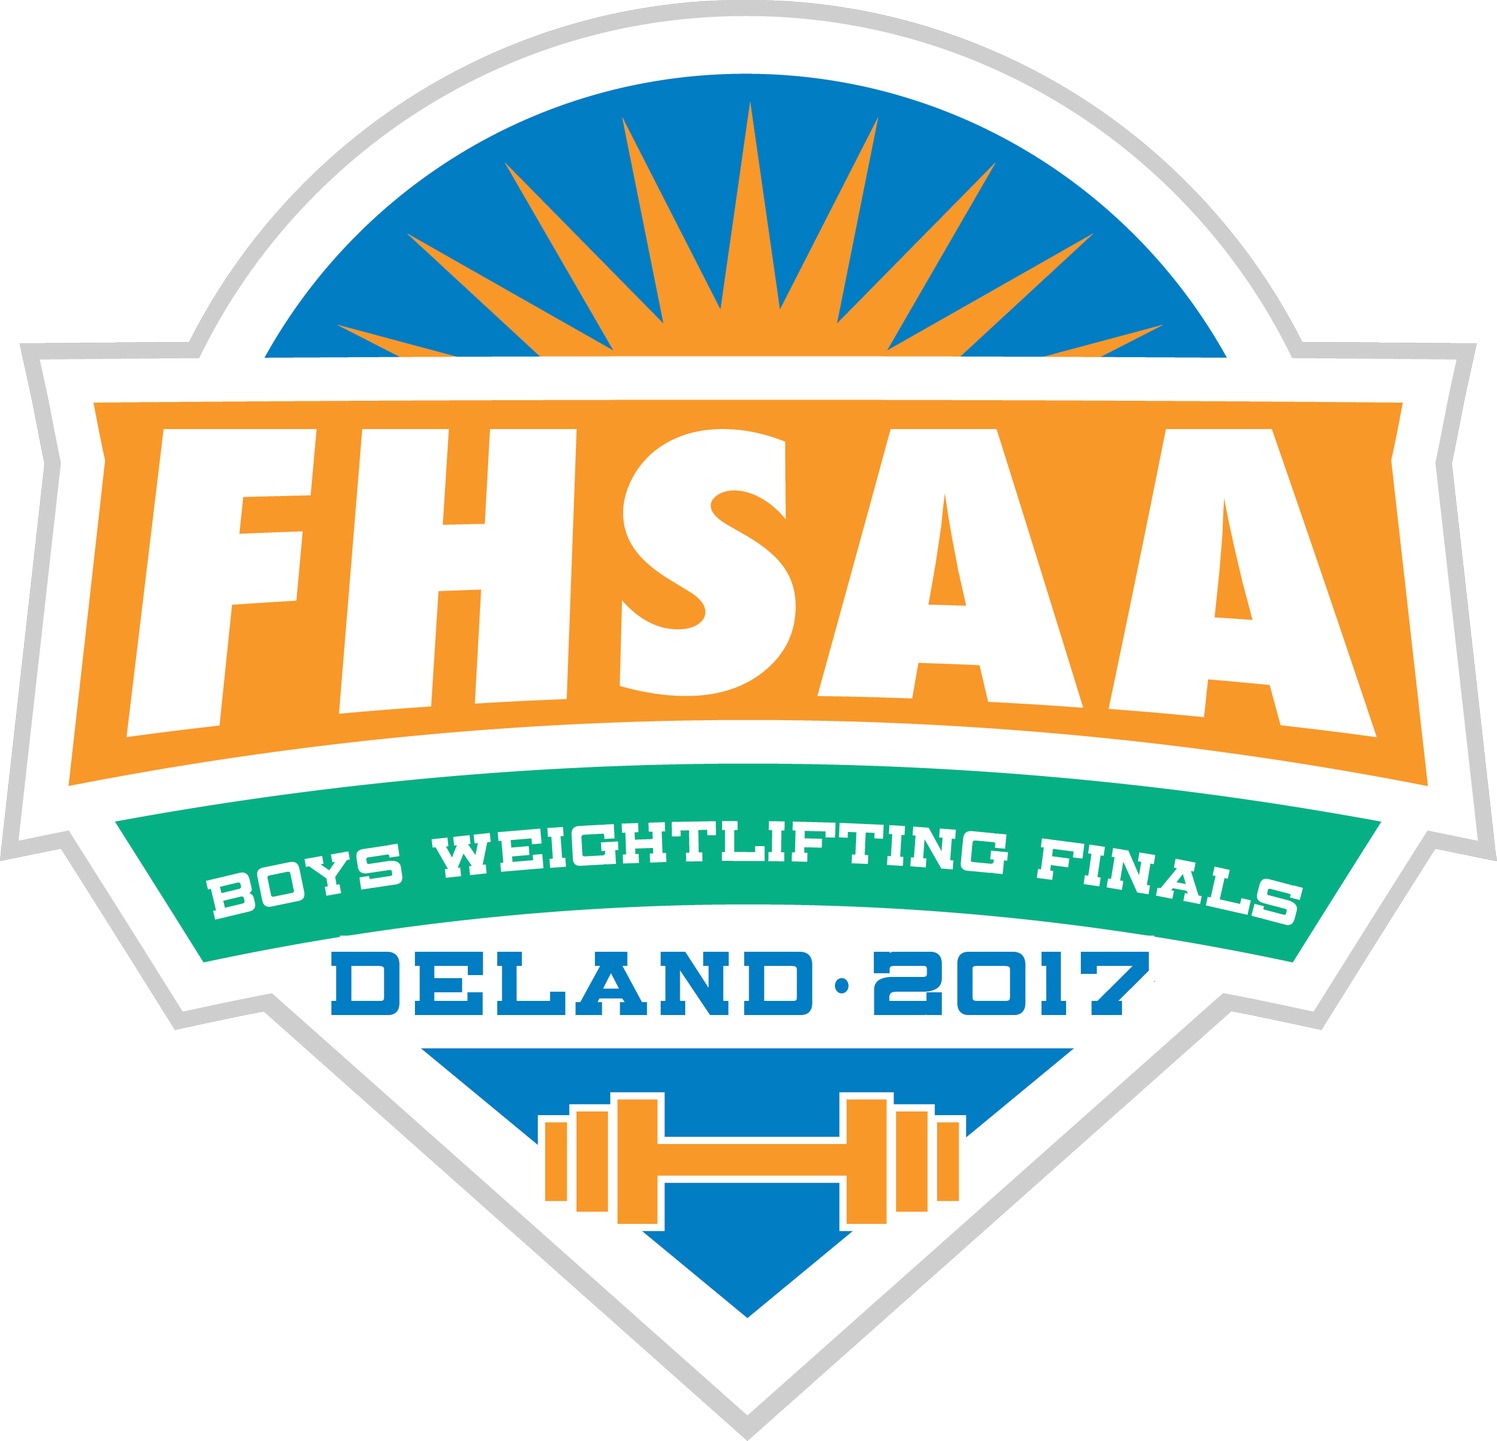 Thank You for Helping with the FHSAA Boys Weightlifting Finals!